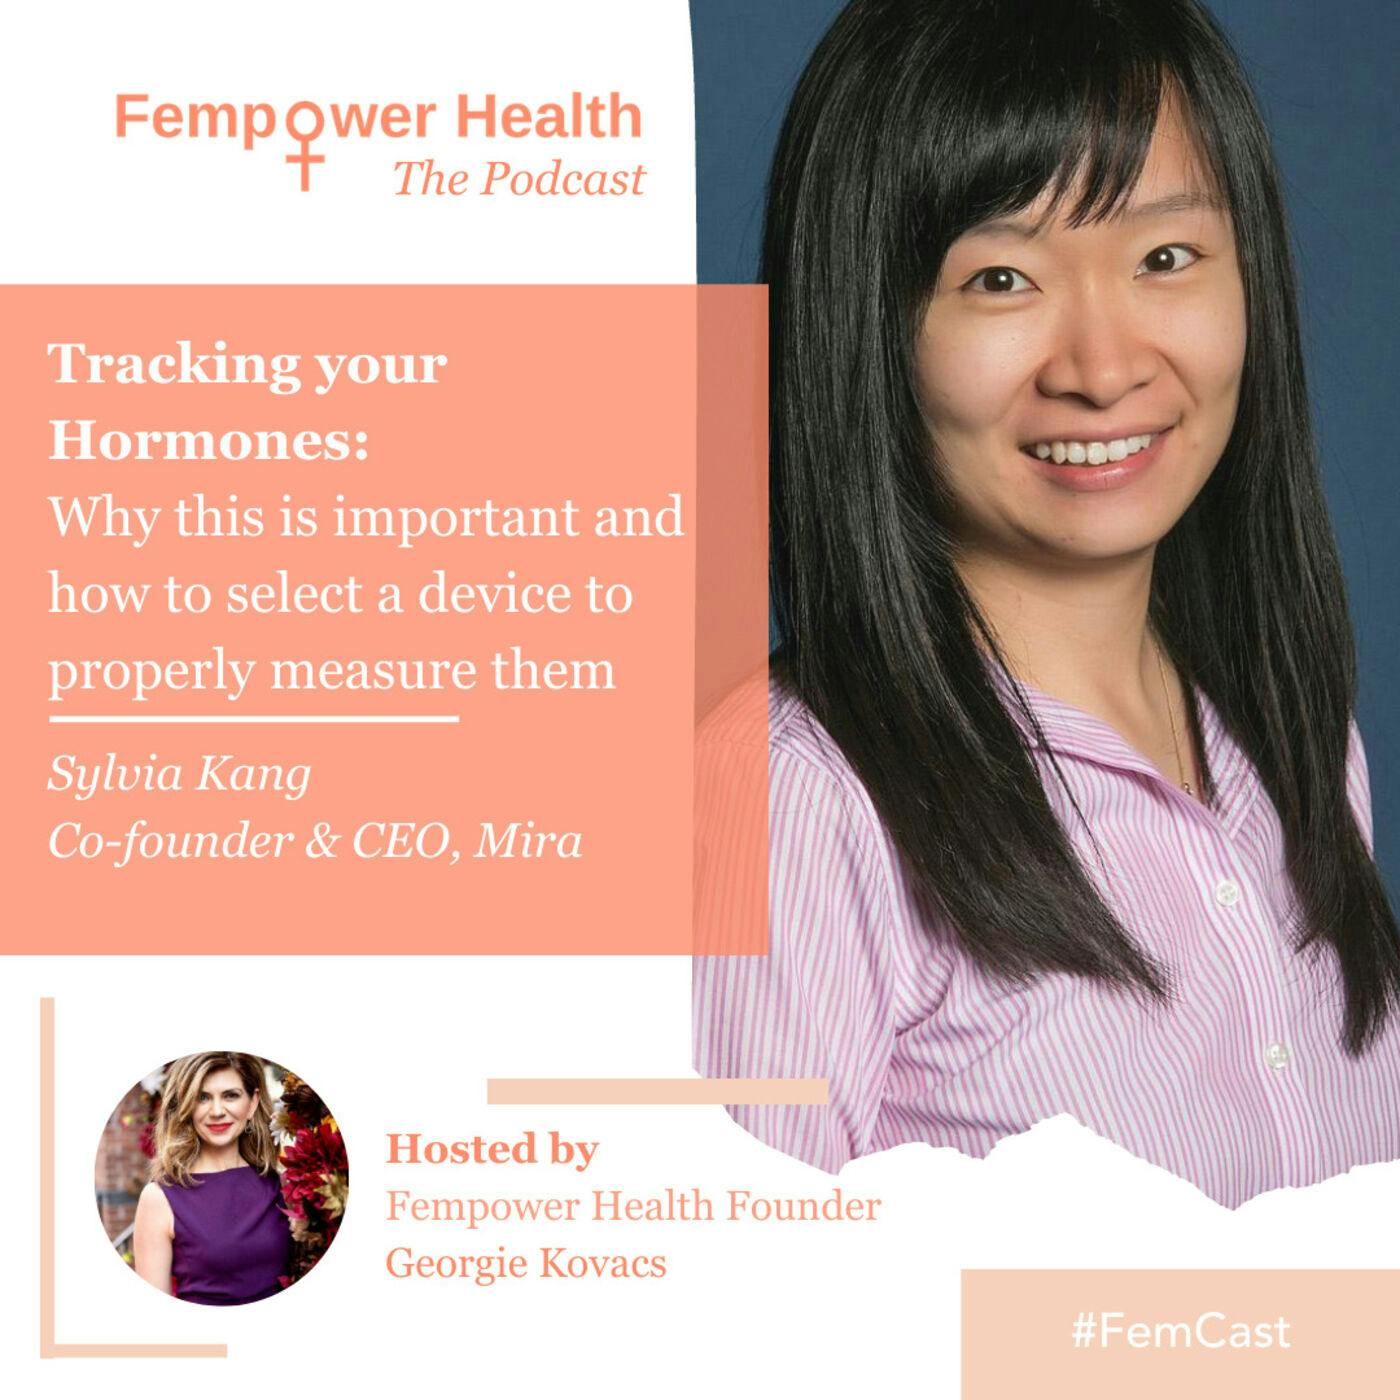 Sylvia Kang | Tracking your Hormones: Why this is important and how to select a device to properly measure them